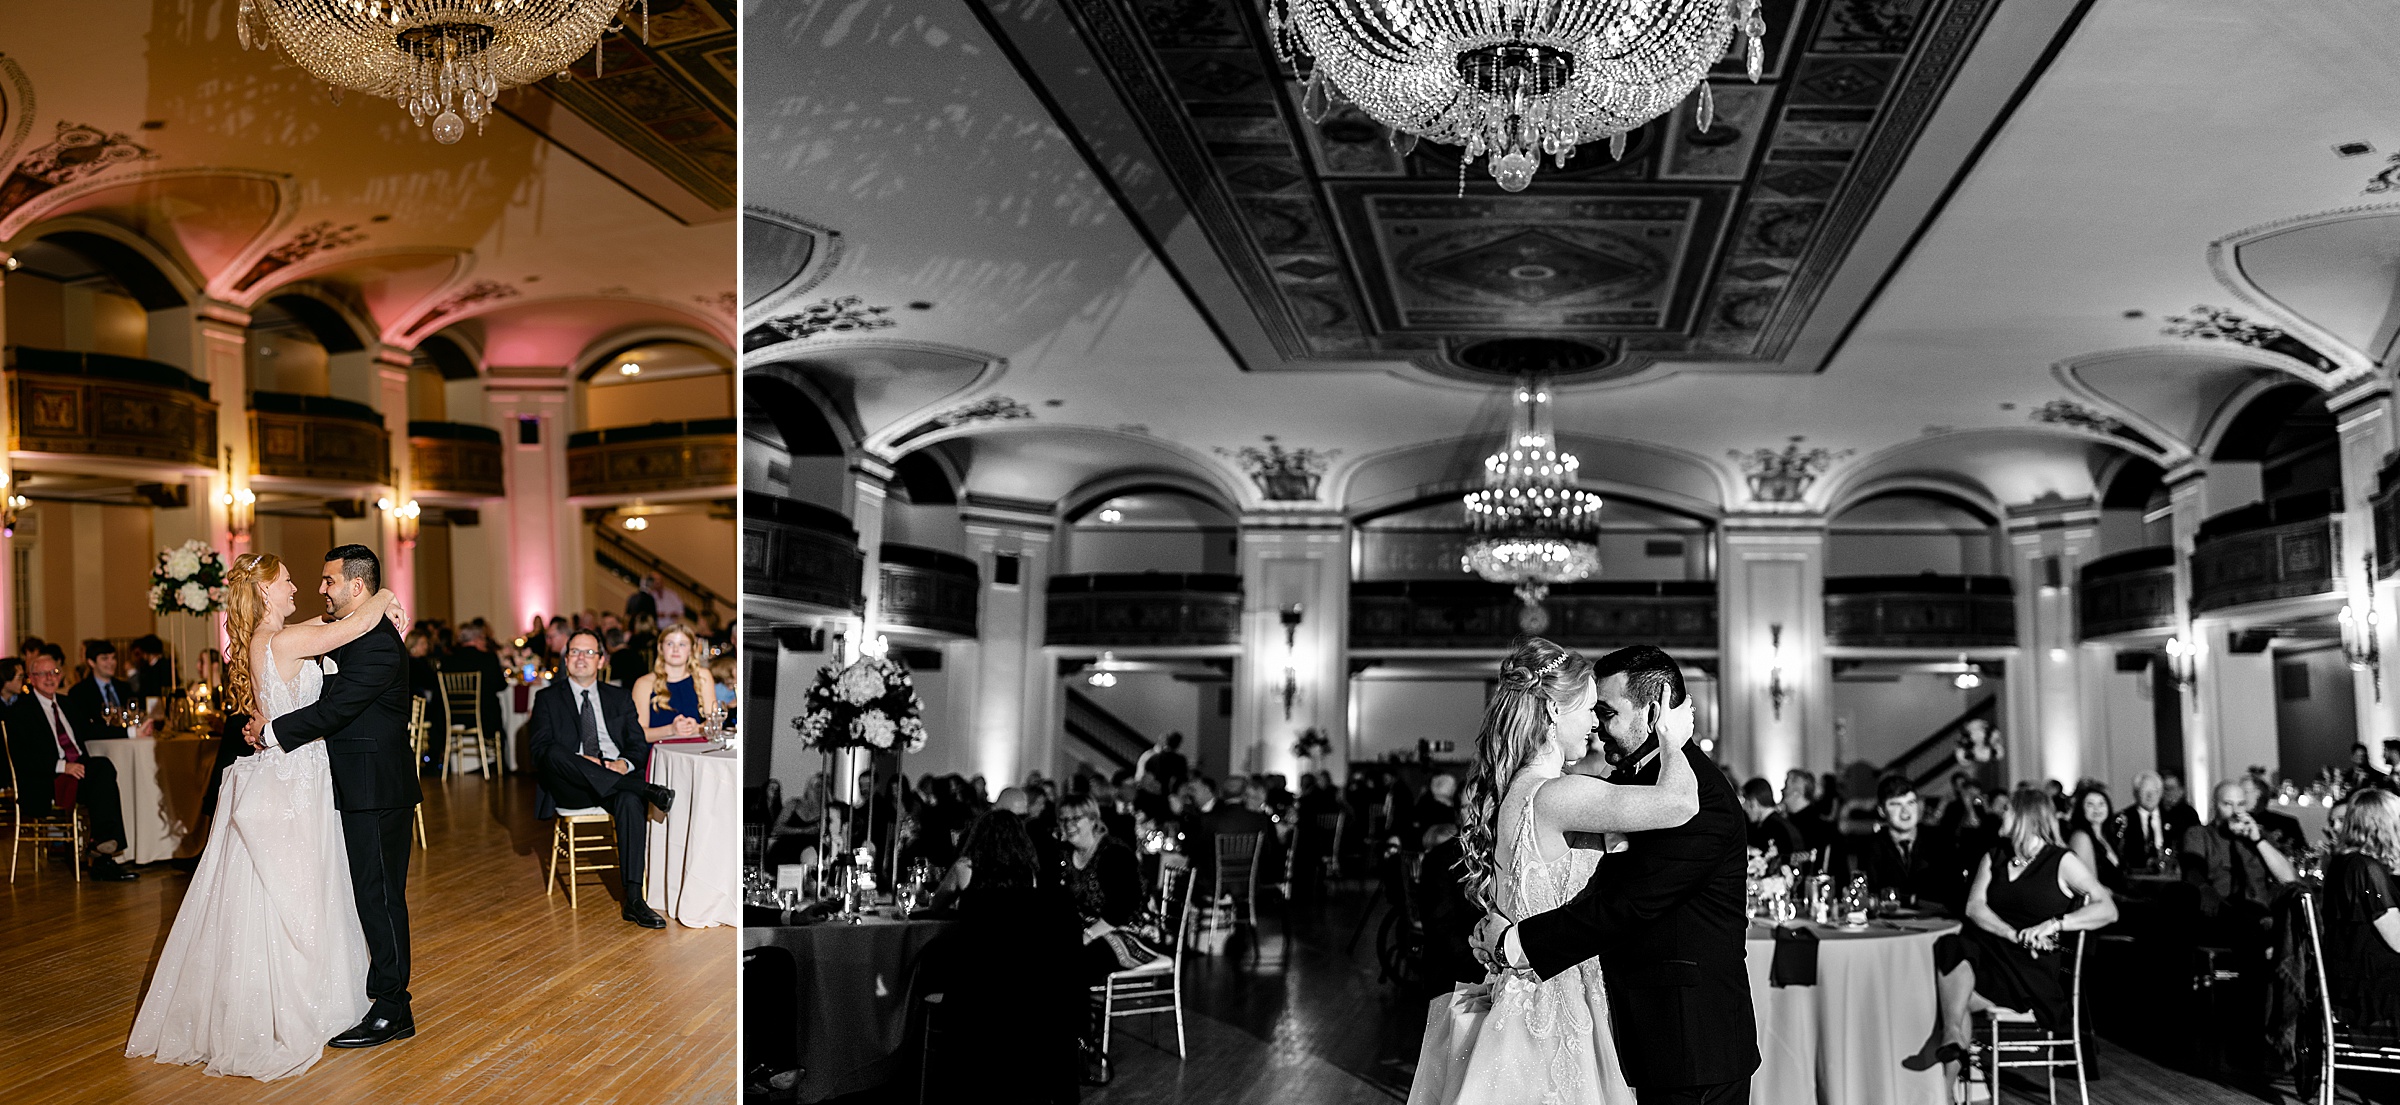 Bride and Groom's first dance in the ballroom at the masonic temple in Detroit by Michele Maloney Photography